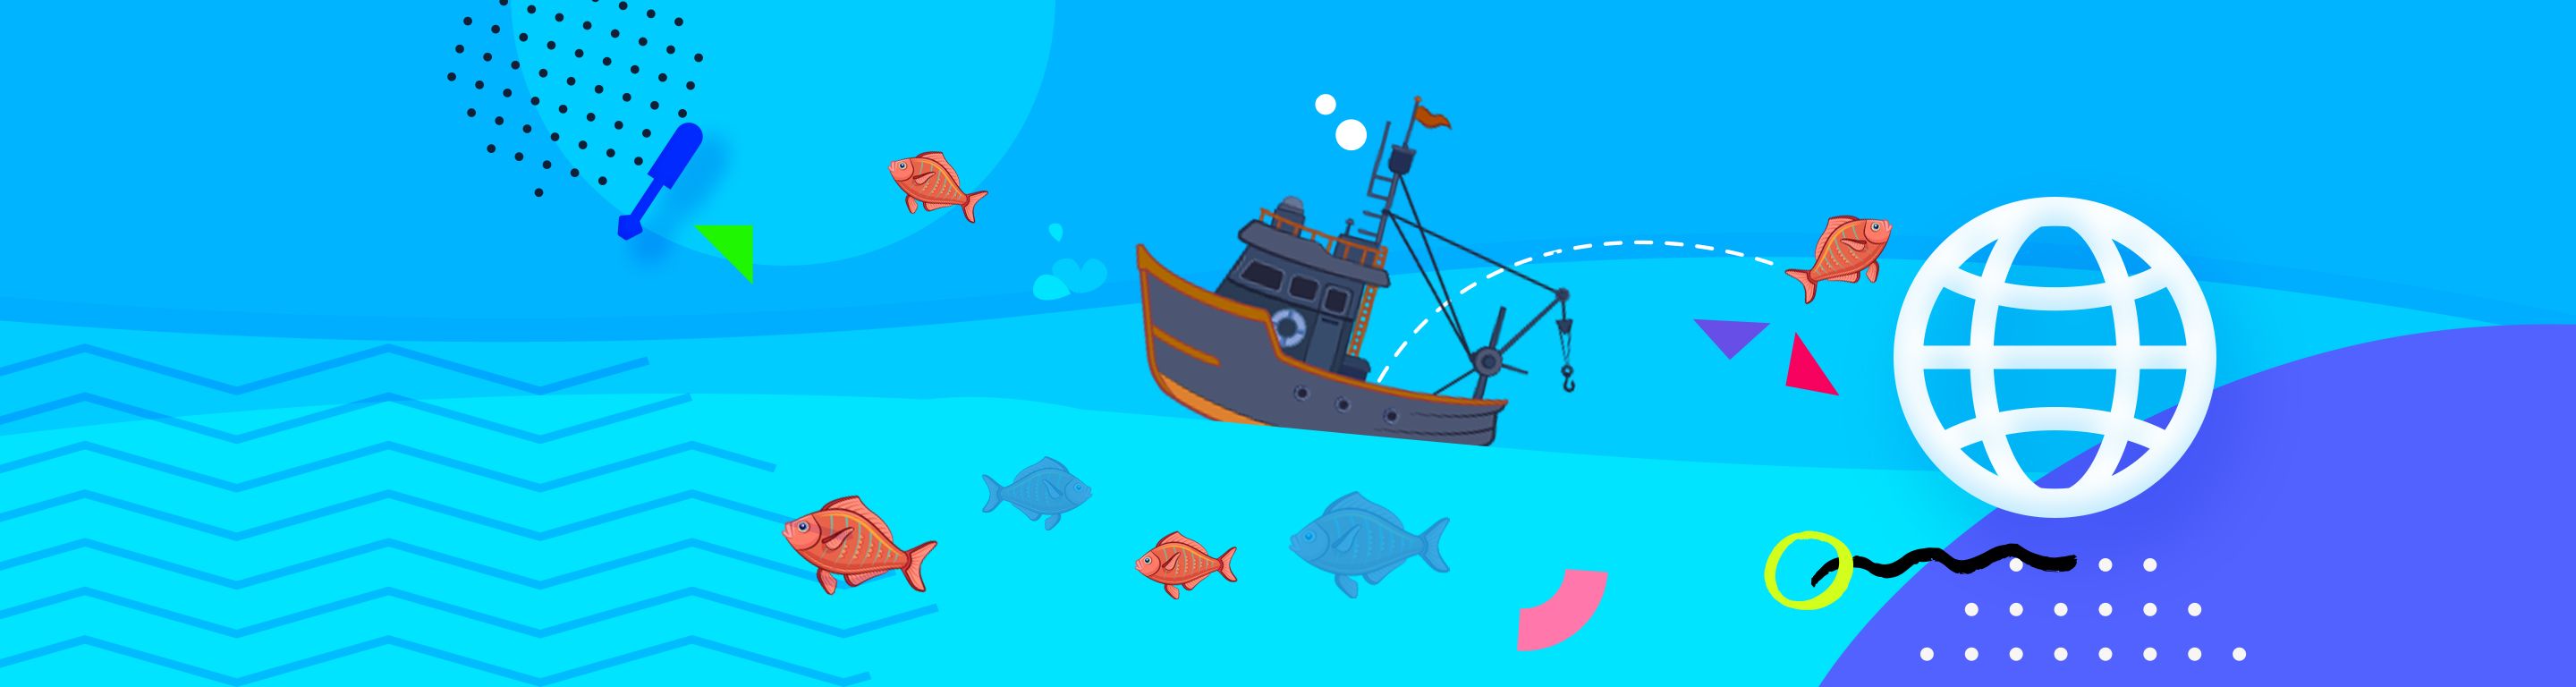 Boat on ocean catching fish next to MobLab Online Assignment globe icon